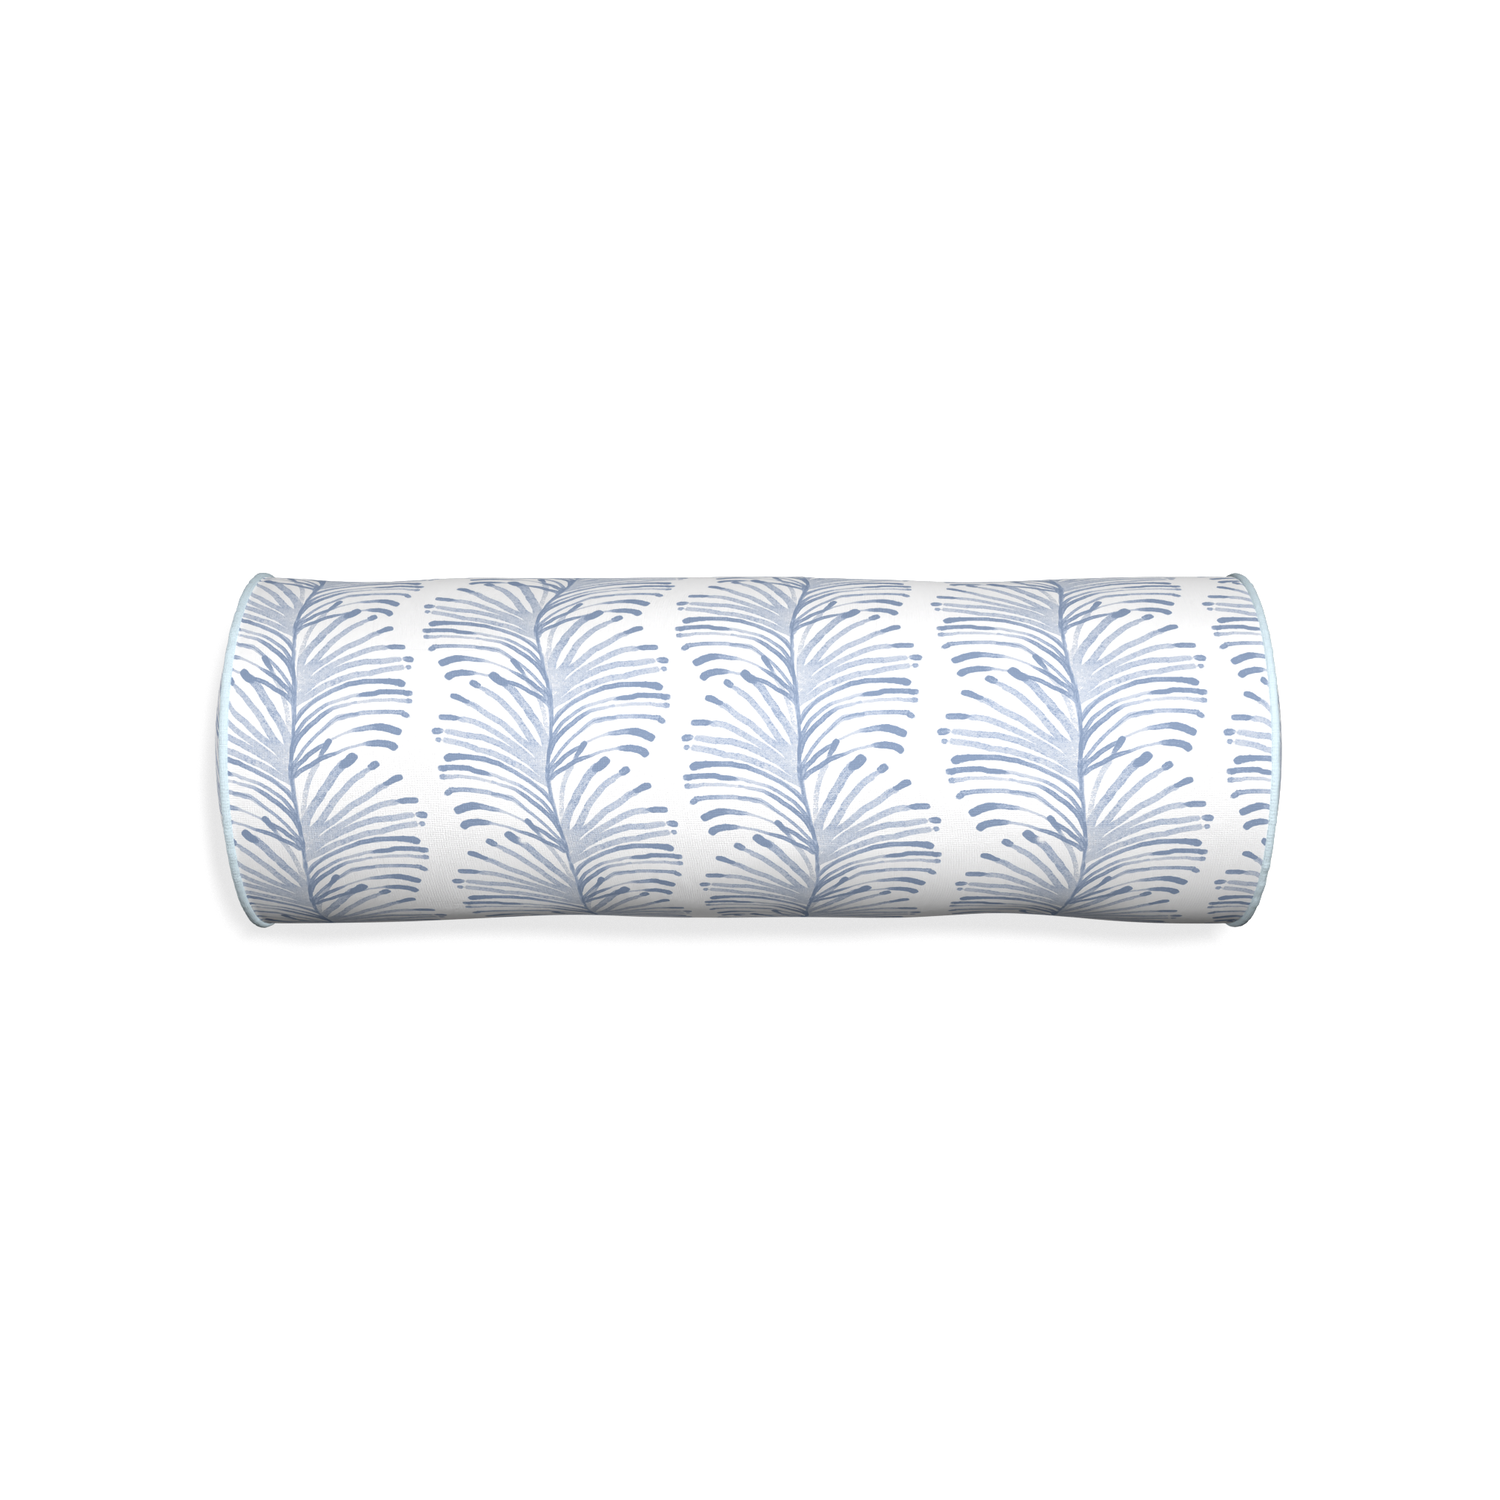 Bolster emma sky custom pillow with powder piping on white background